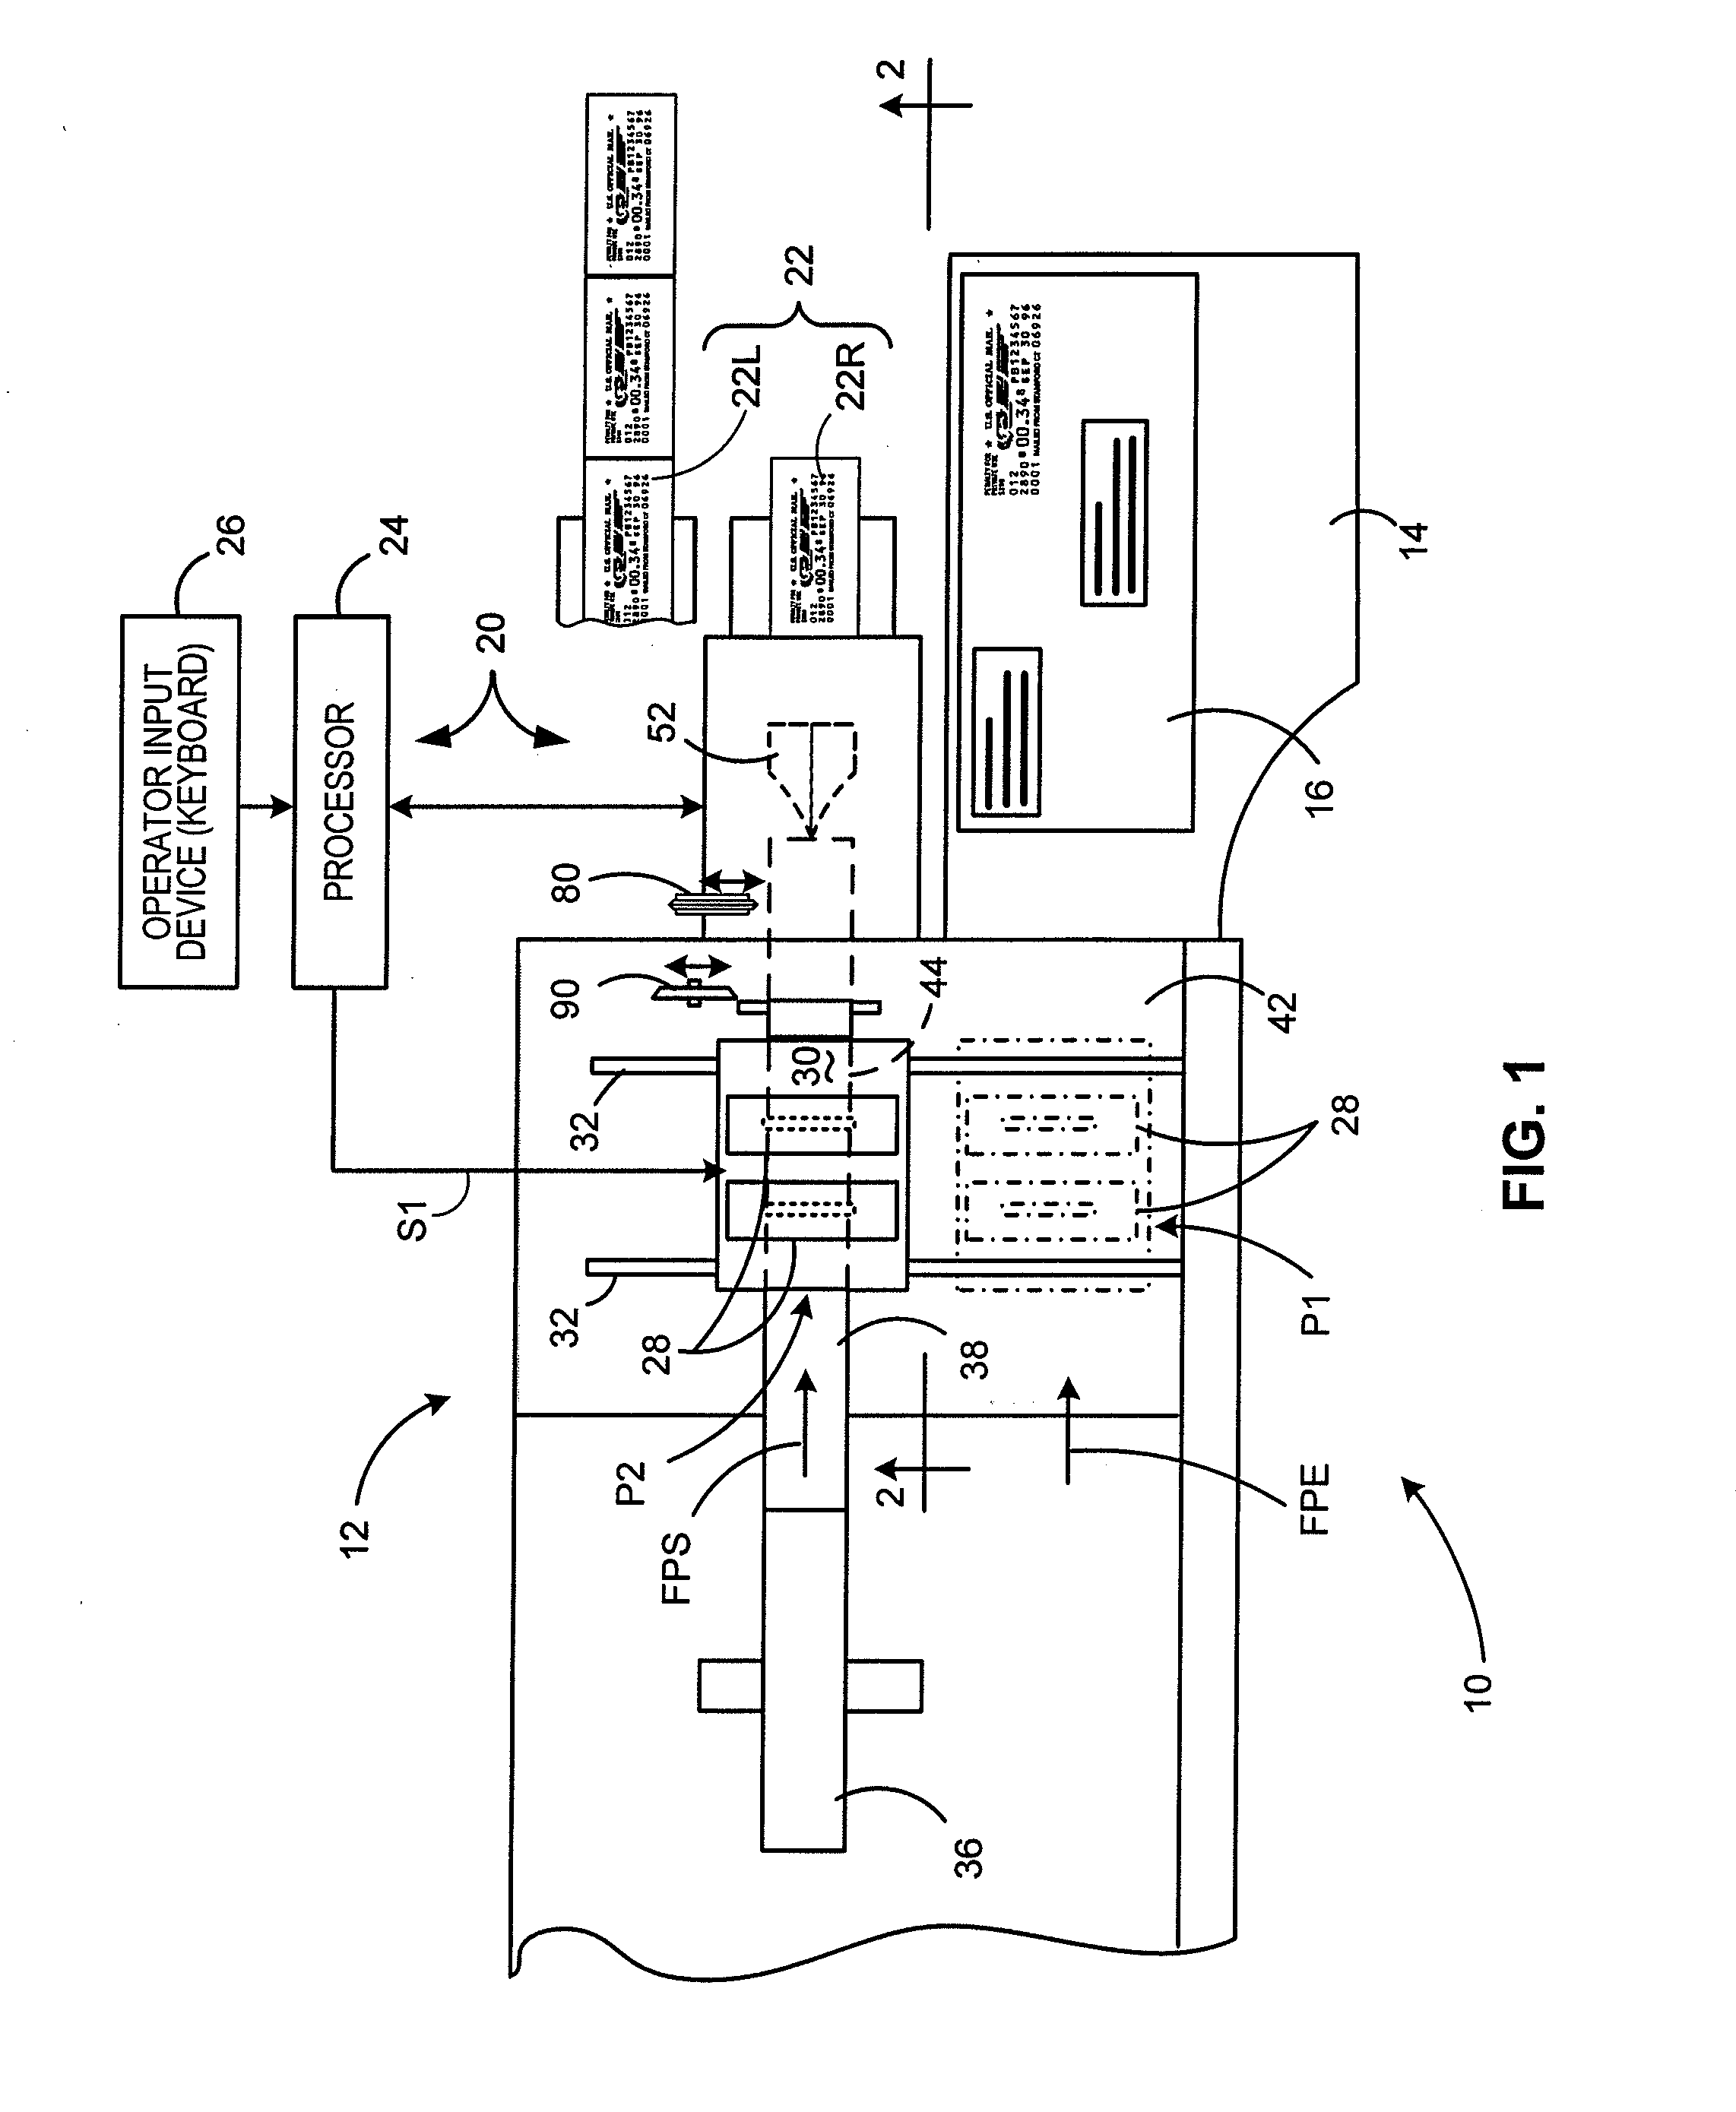 Postage Label Dispensing System Having A Peeler Plow For Dispensing Application Ready and/or Lined Postage Labels